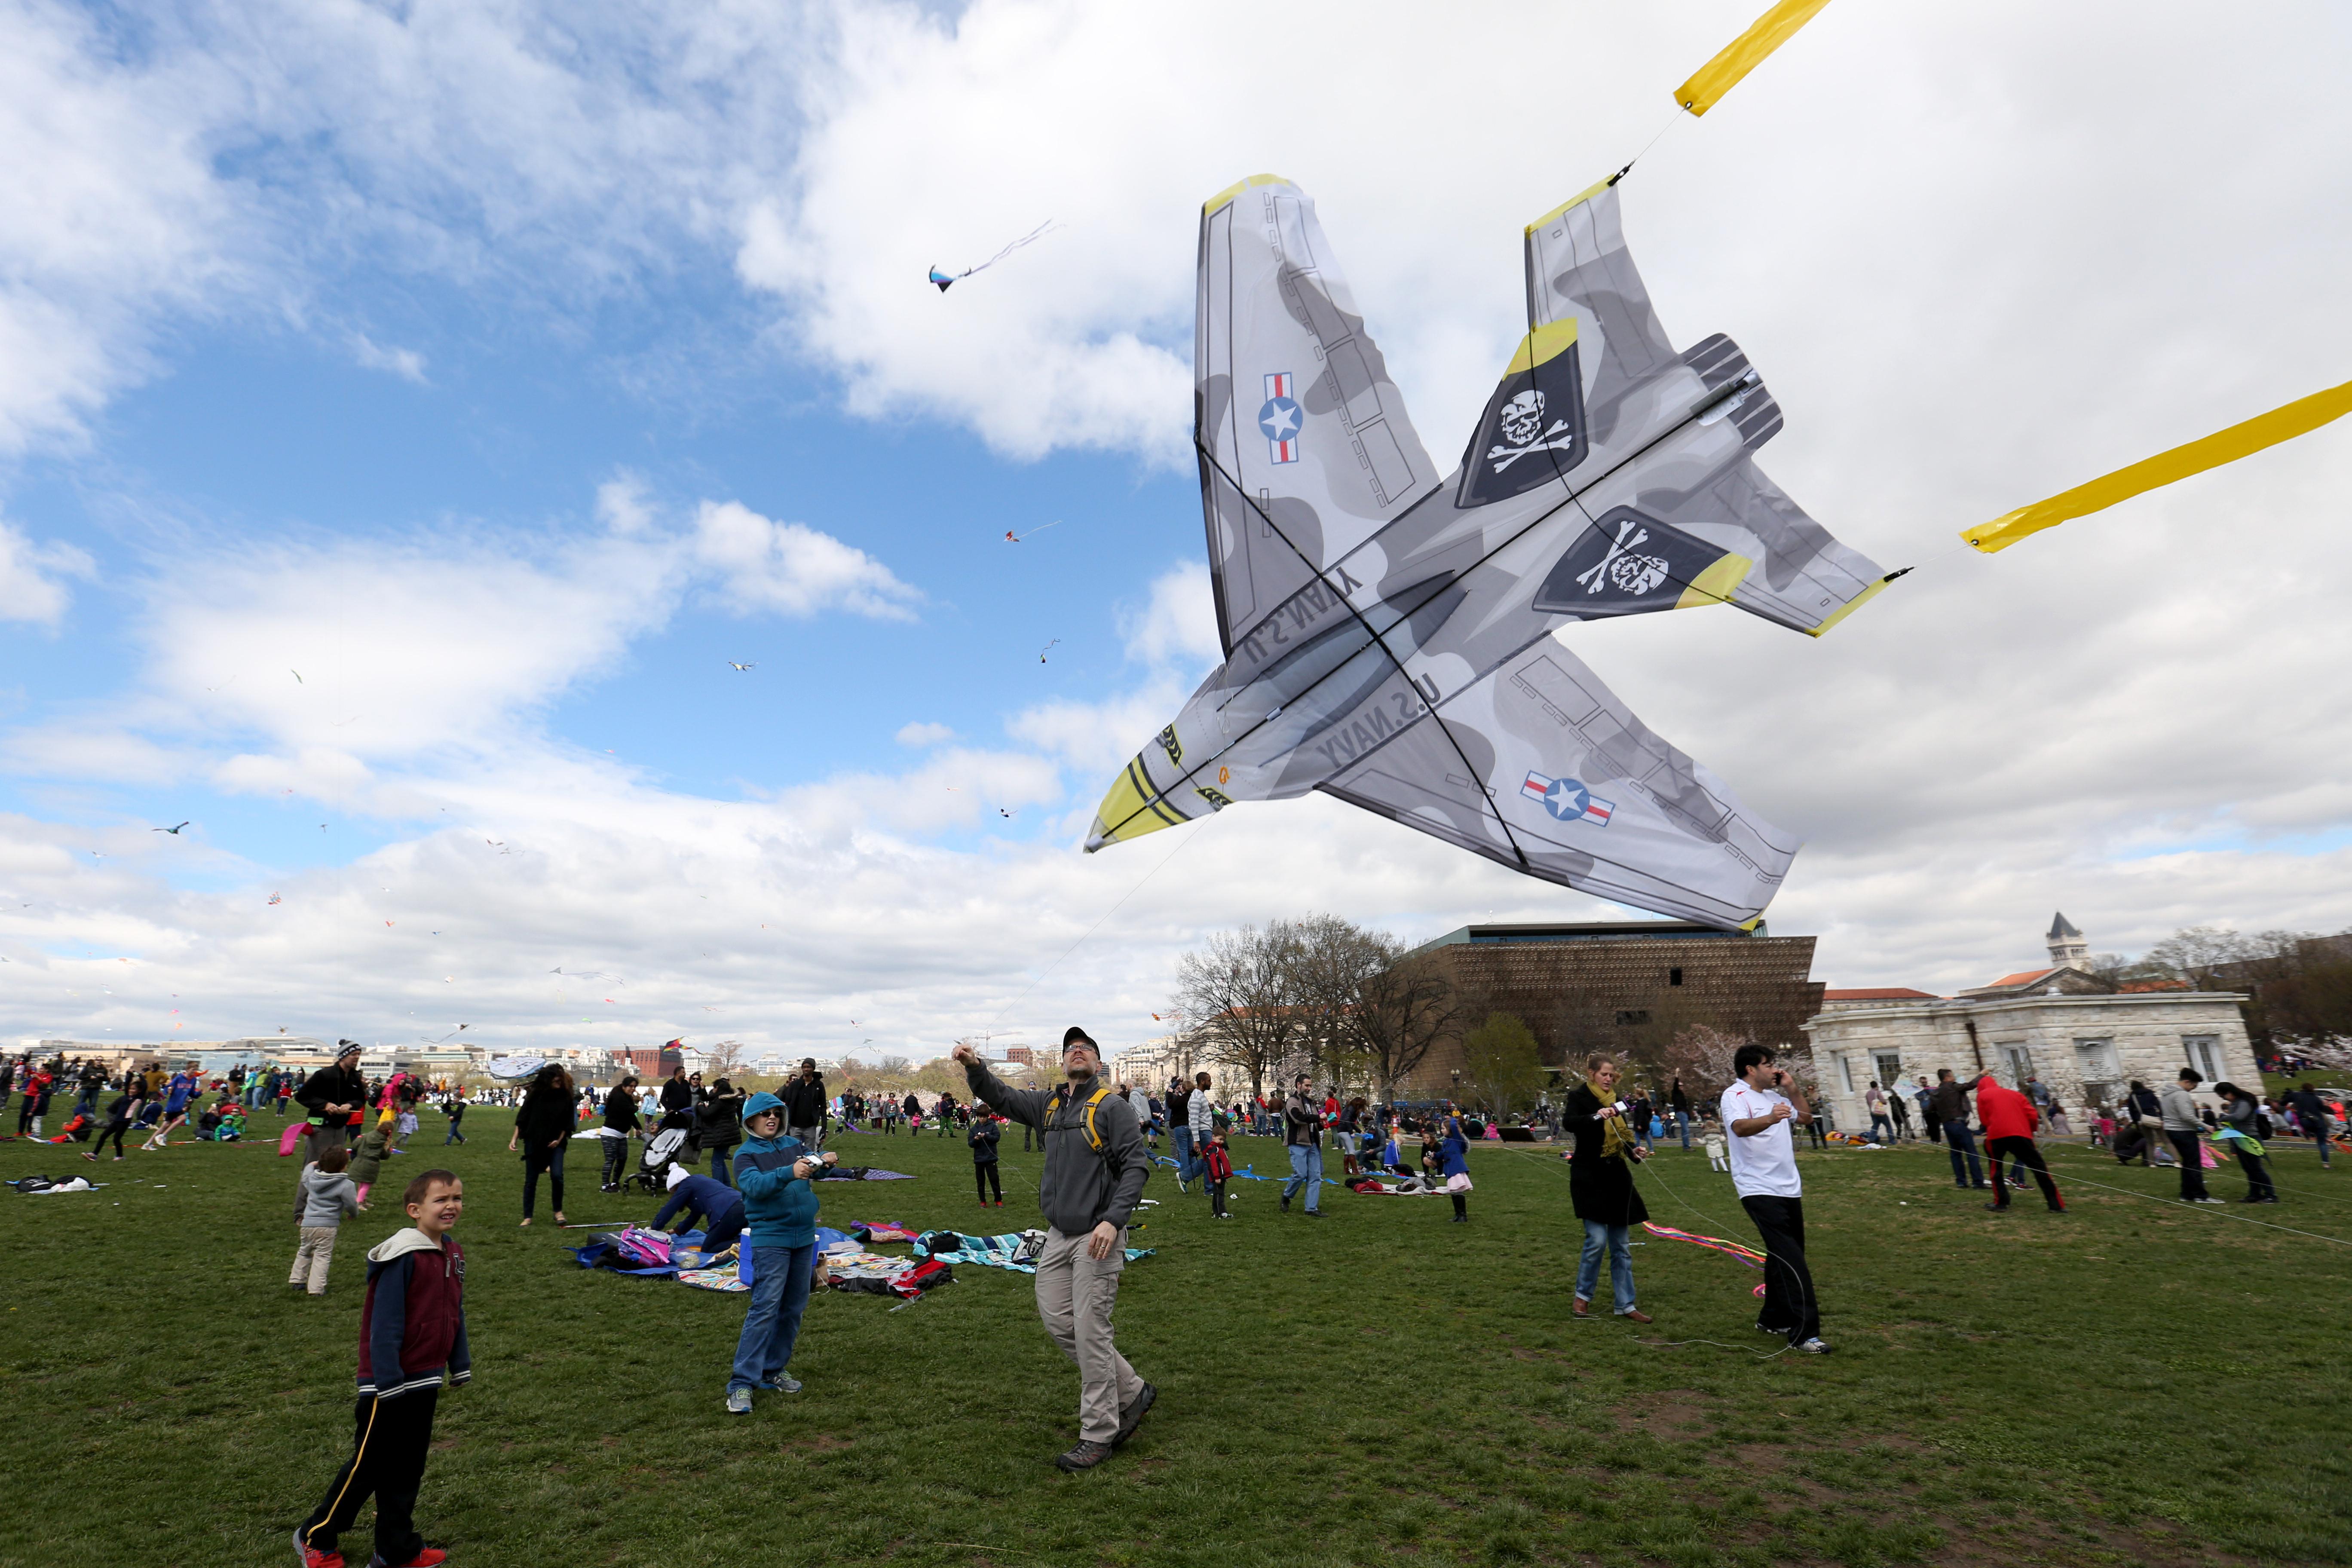 Wind lifts up the Blossom Kite Festival DC Refined